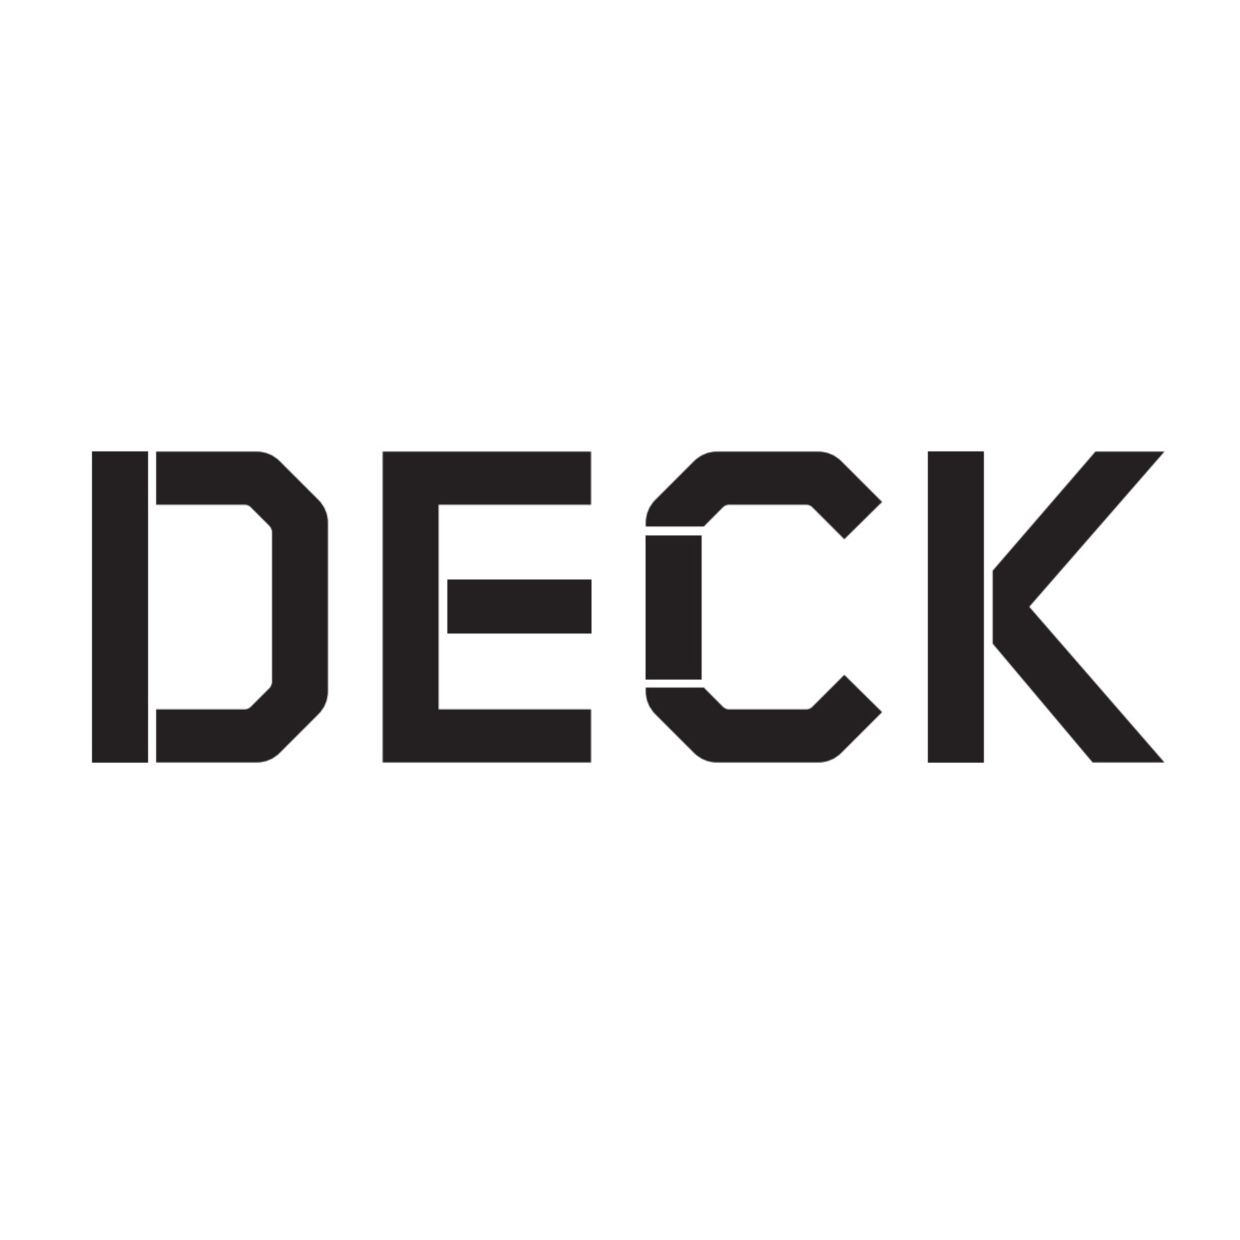 Institutional partners DECK DECK is a contemporary arts organisation where all can gather through photography arts. DECK aims to be...